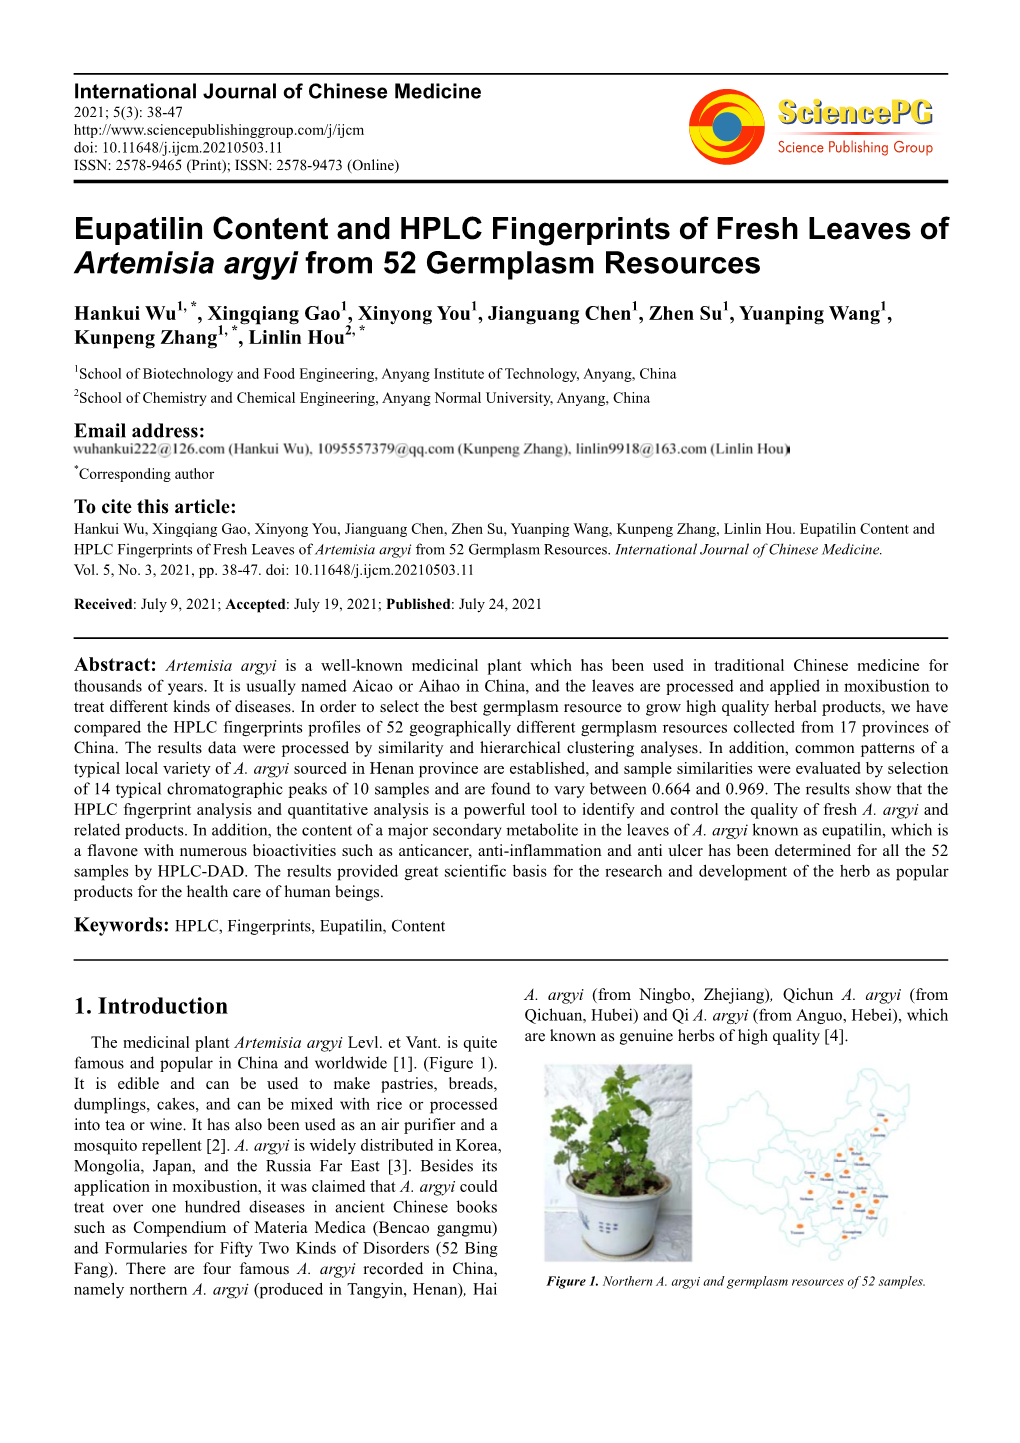 Eupatilin Content and HPLC Fingerprints of Fresh Leaves of Artemisia Argyi from 52 Germplasm Resources